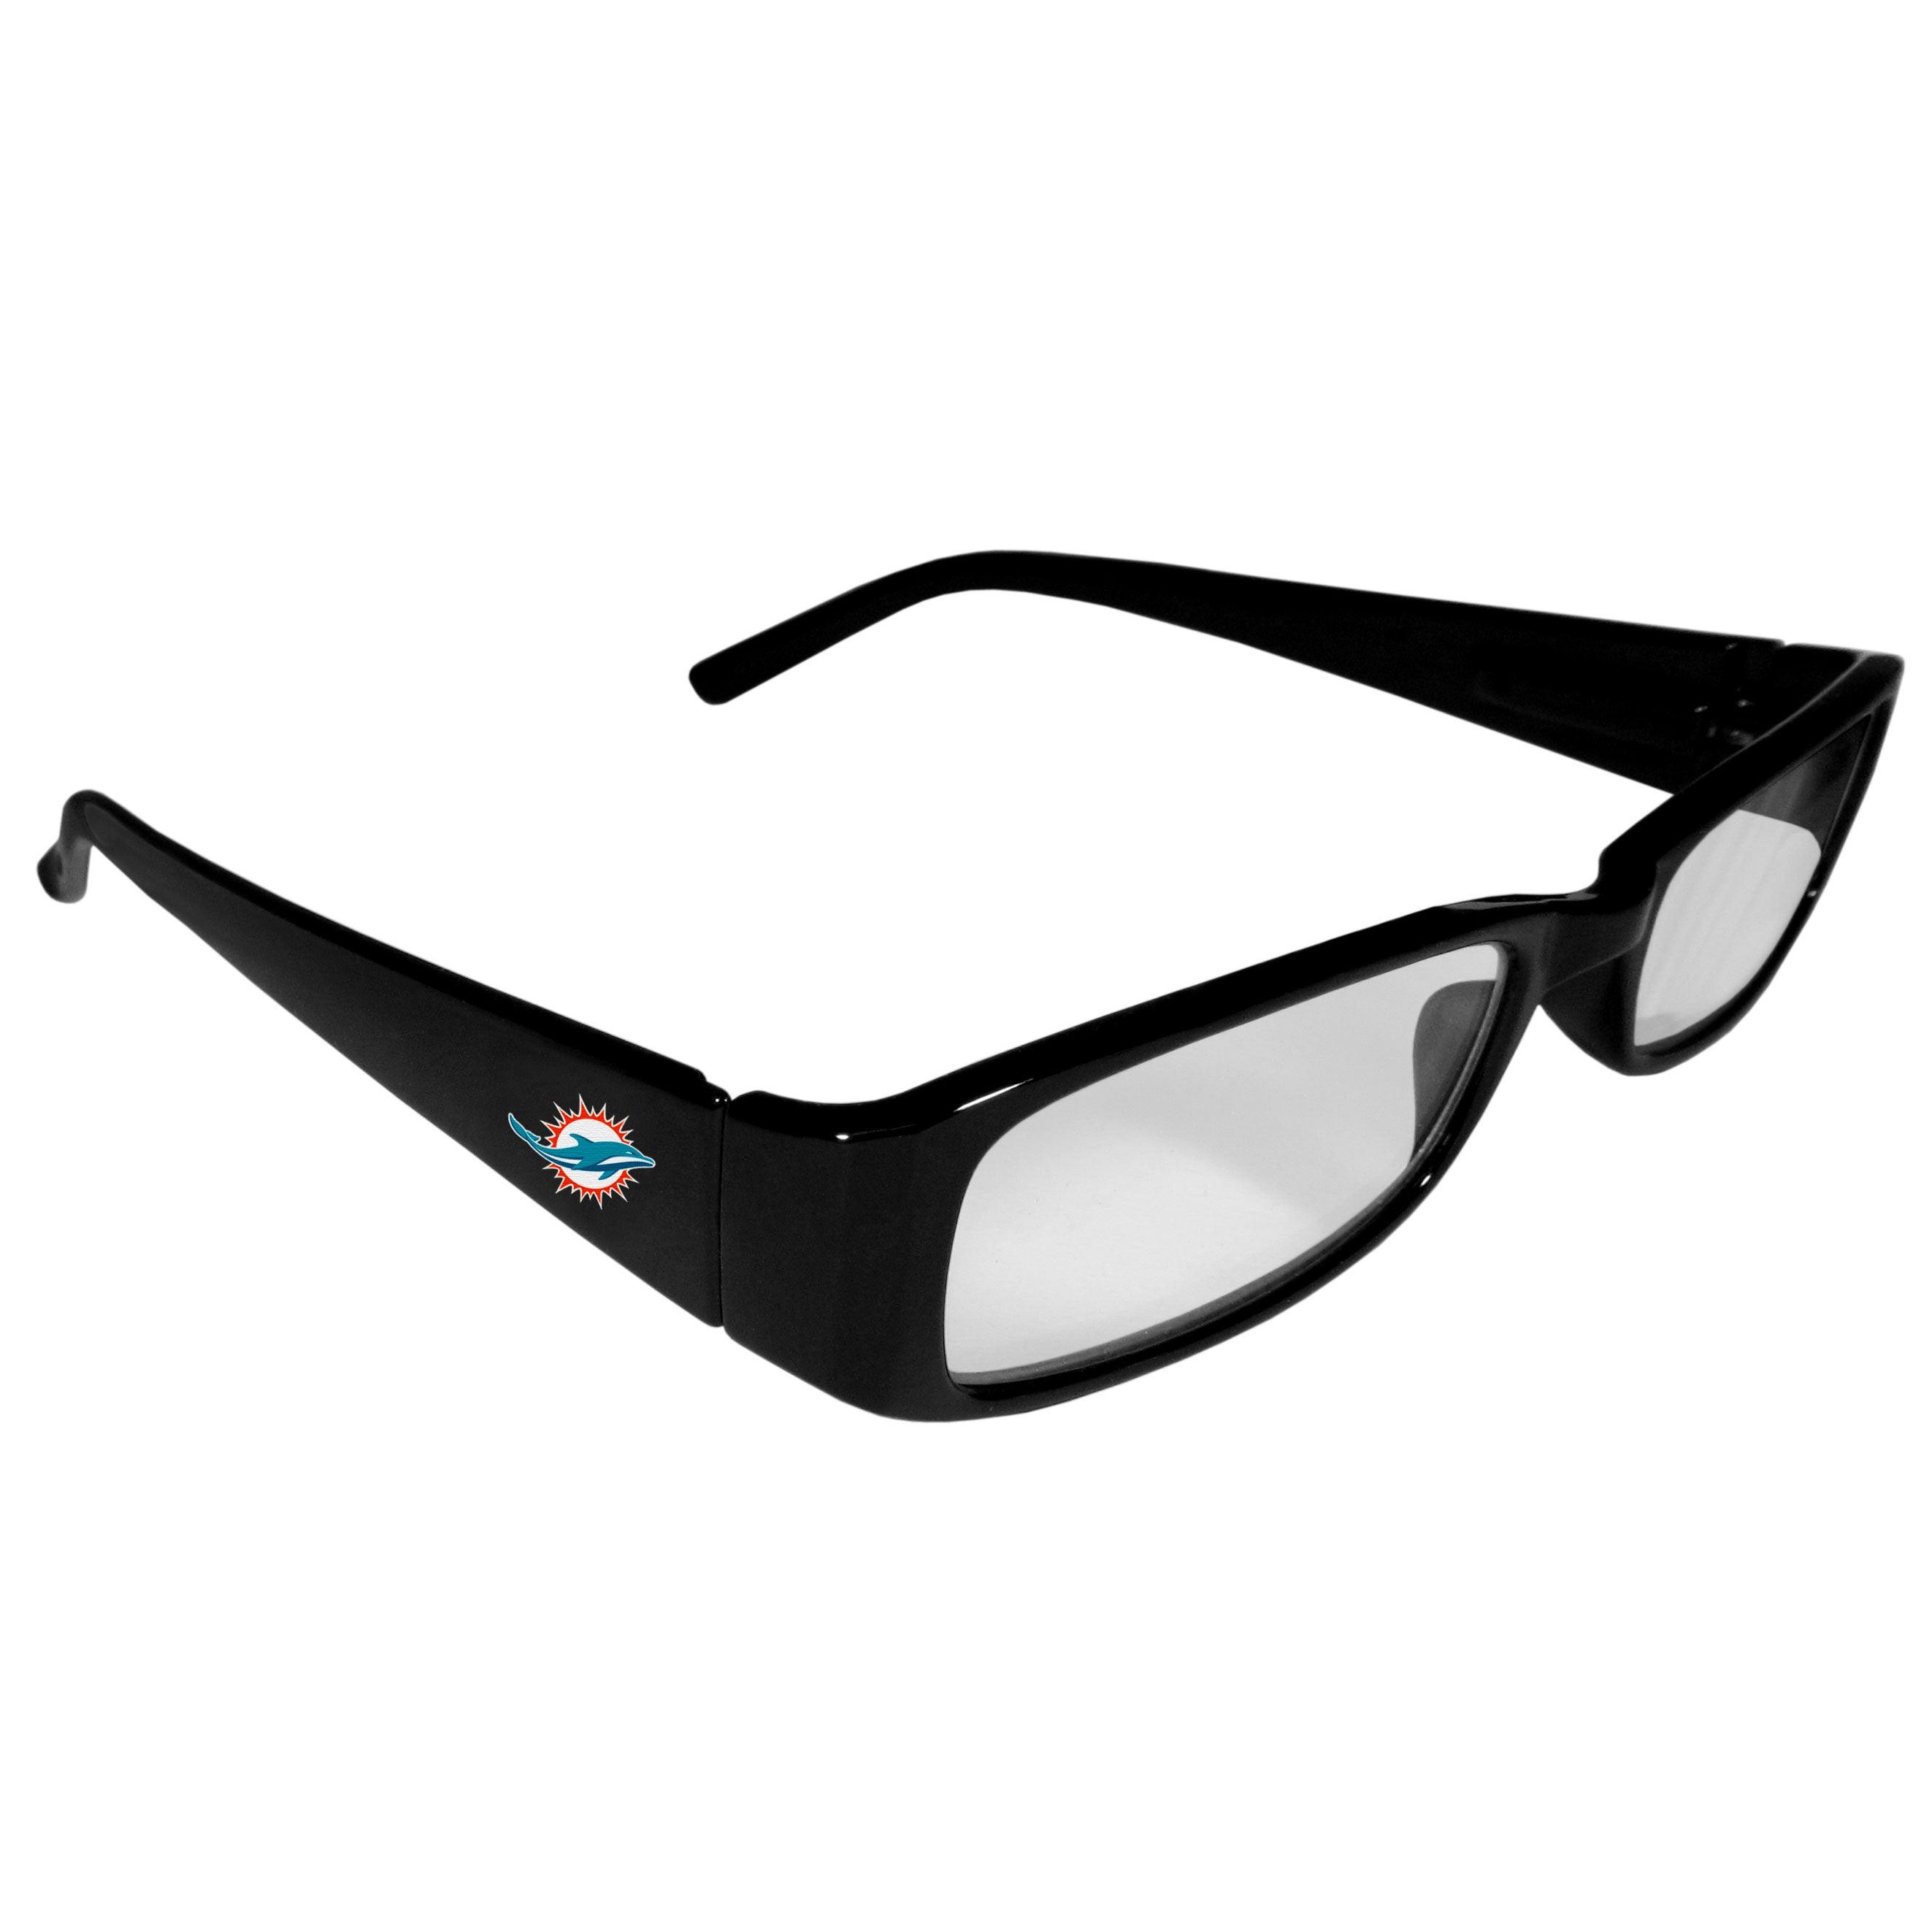 Miami Dolphins Printed Reading Glasses, +1.50 - Flyclothing LLC